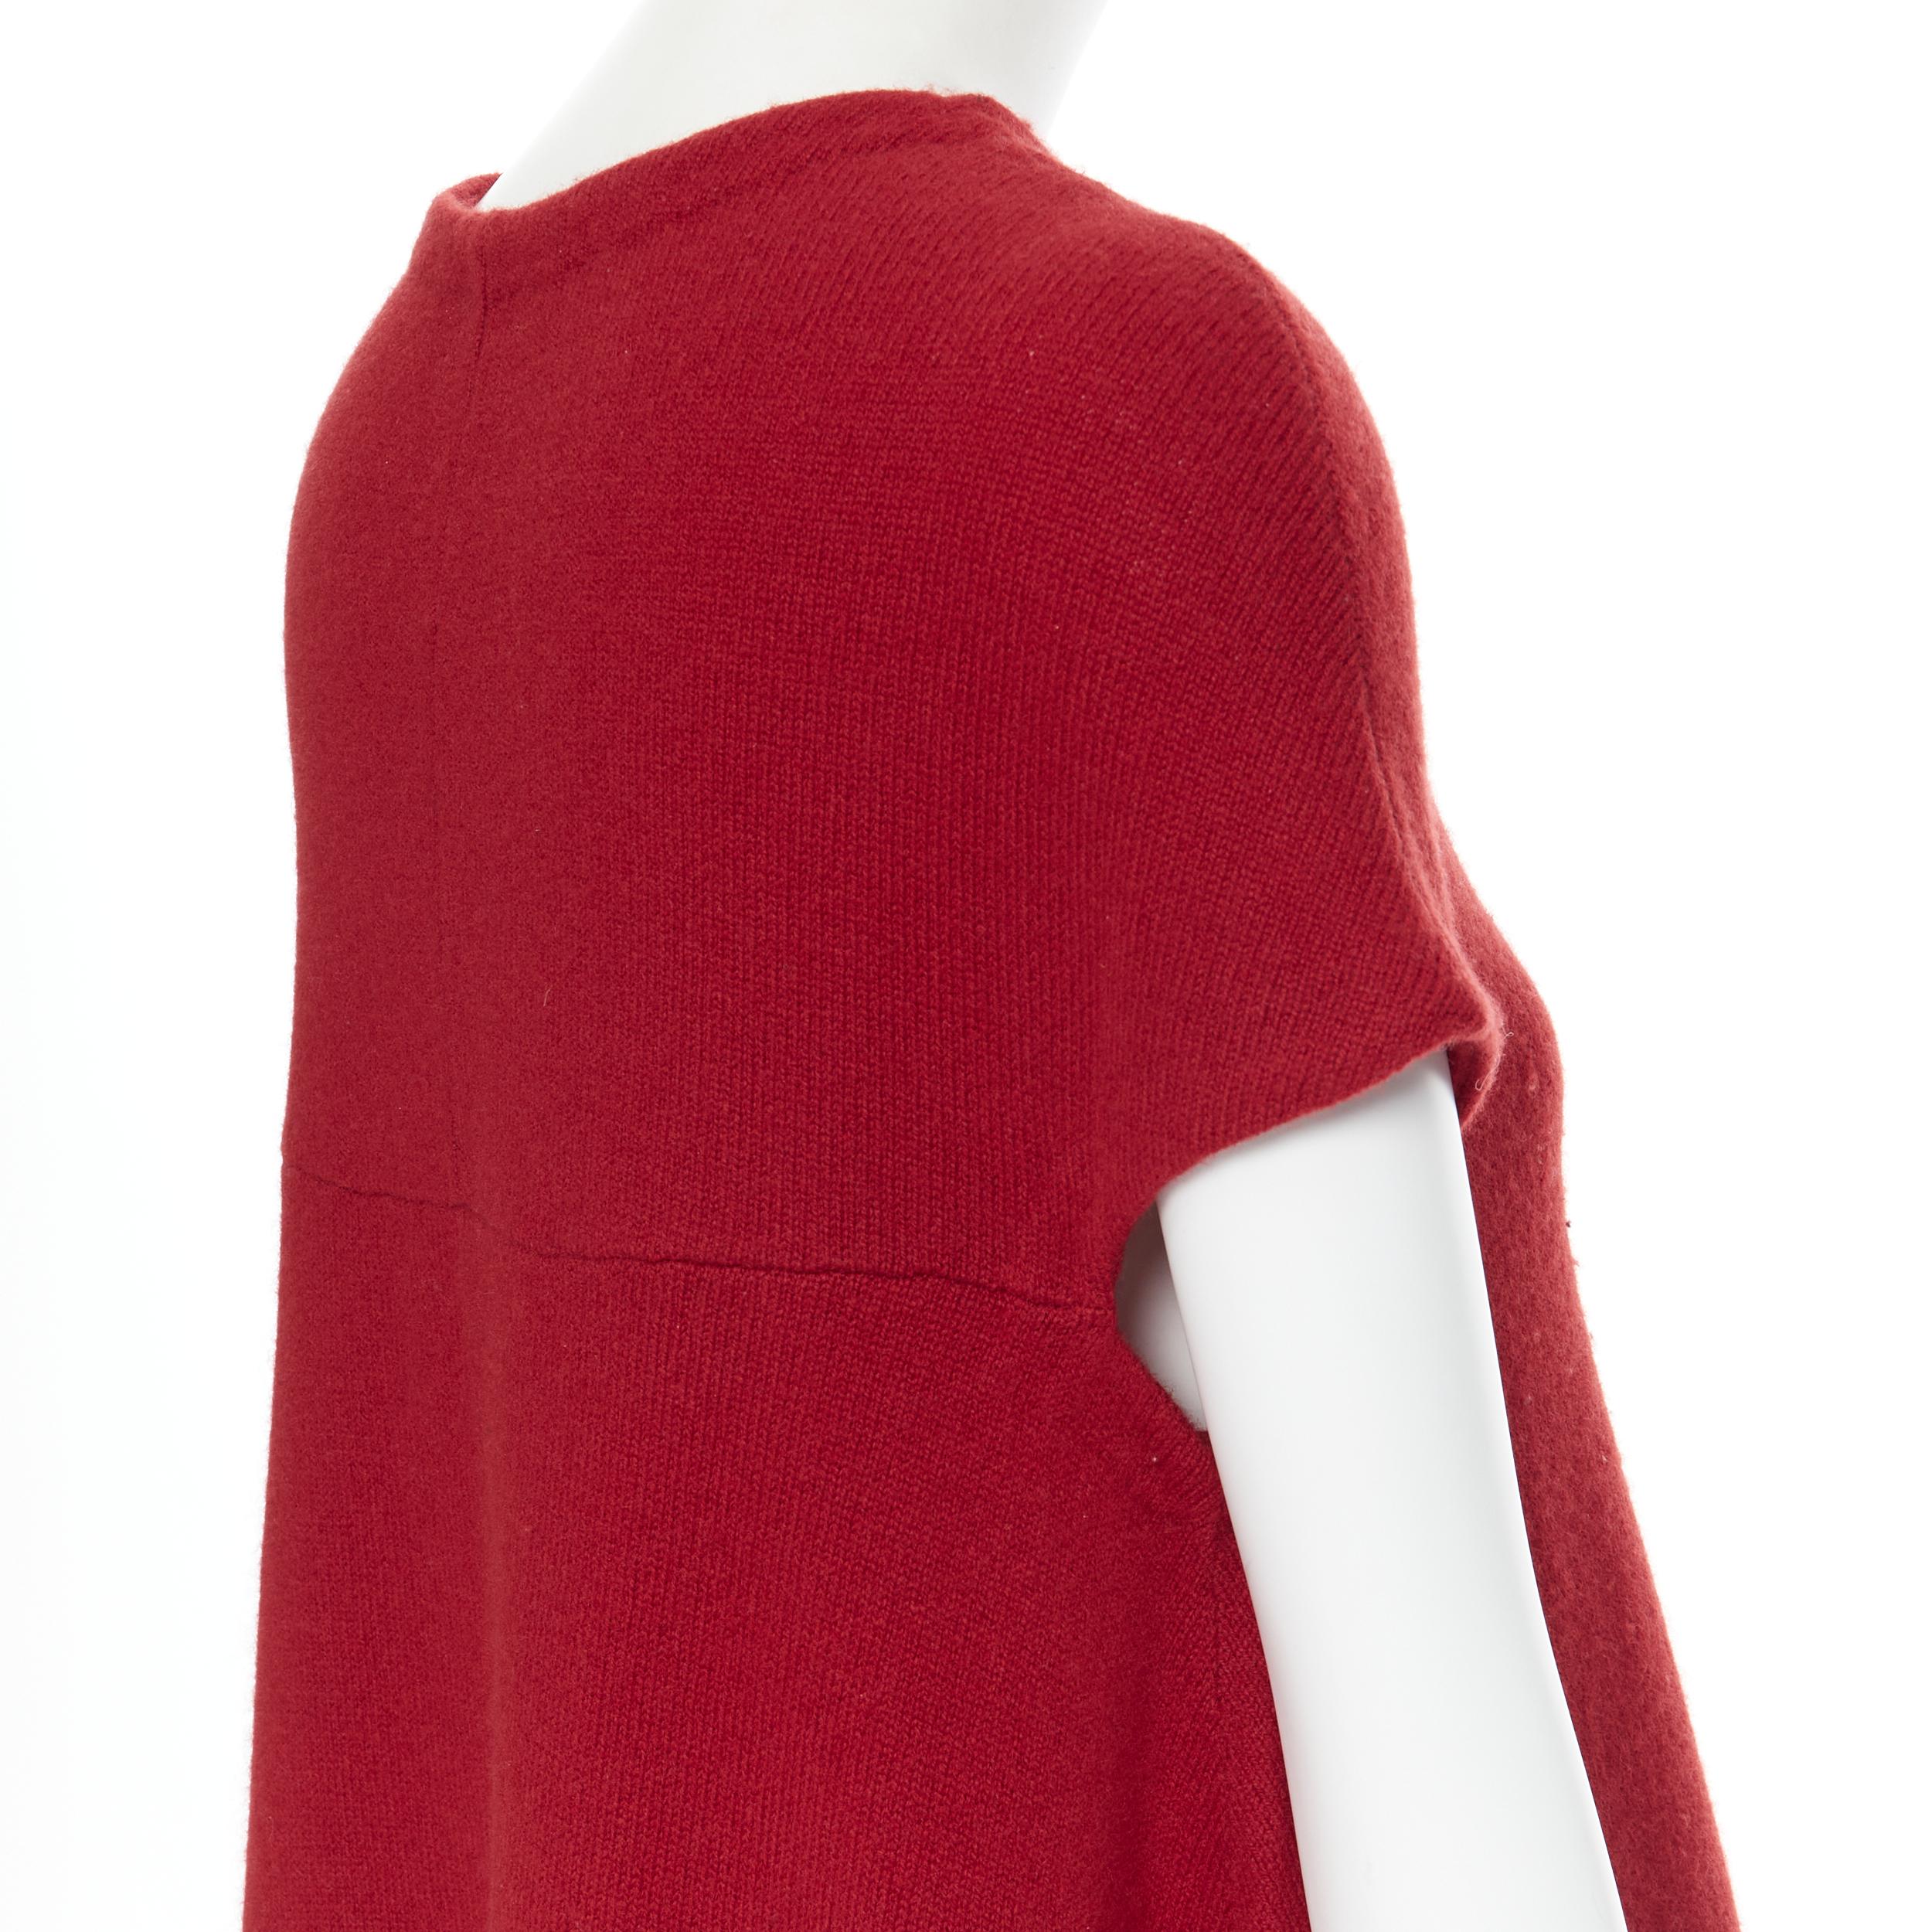 BALENCIAGA Knits 2011 100% wool red round neck cap sleeve trapeze dress Fr36 S Reference: AEMA/A00025 
Brand: Balenciaga 
Material: Wool 
Color: Red 
Pattern: Solid 
Extra Detail: Round neck. Cap sleeve. Trapeze Aline silhouette. 
Made in: China